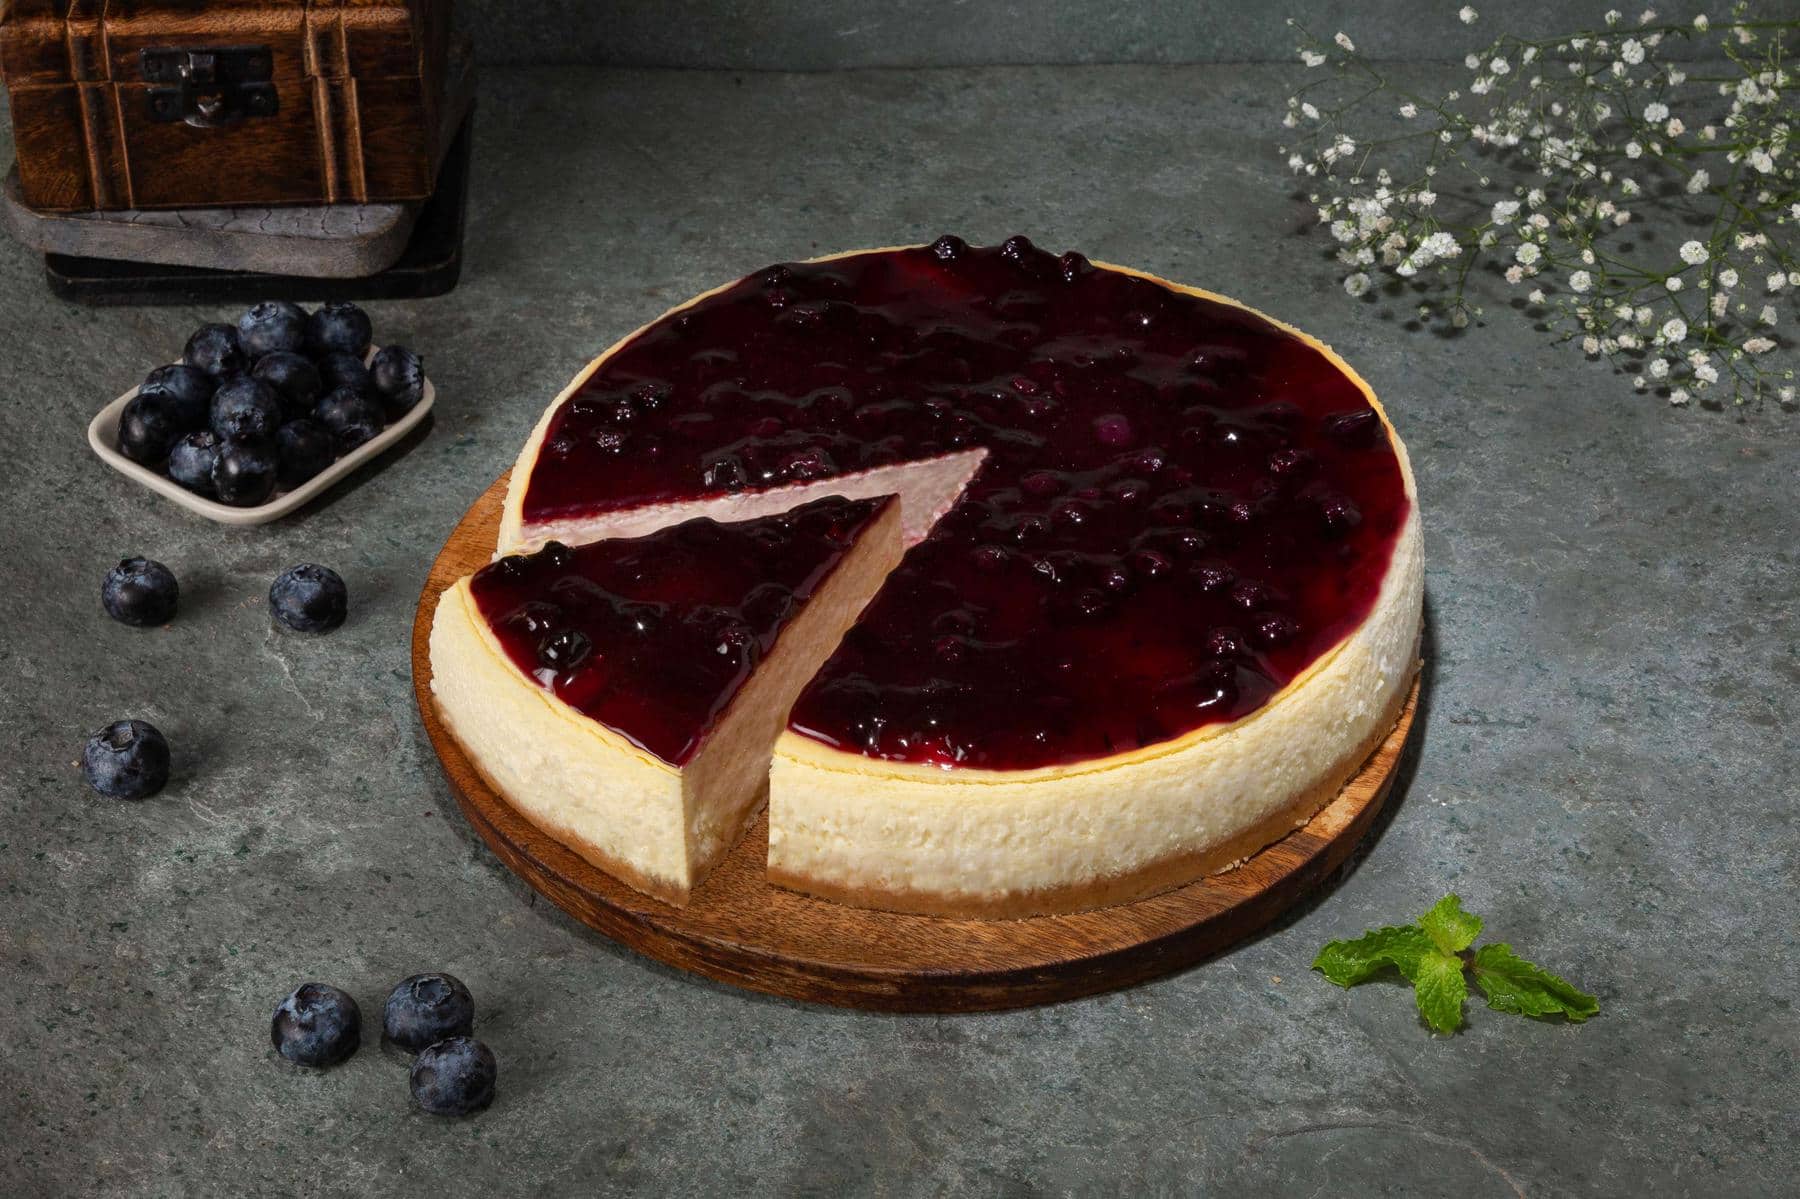 Blueberry Baked Cheesecake (600 Gm)